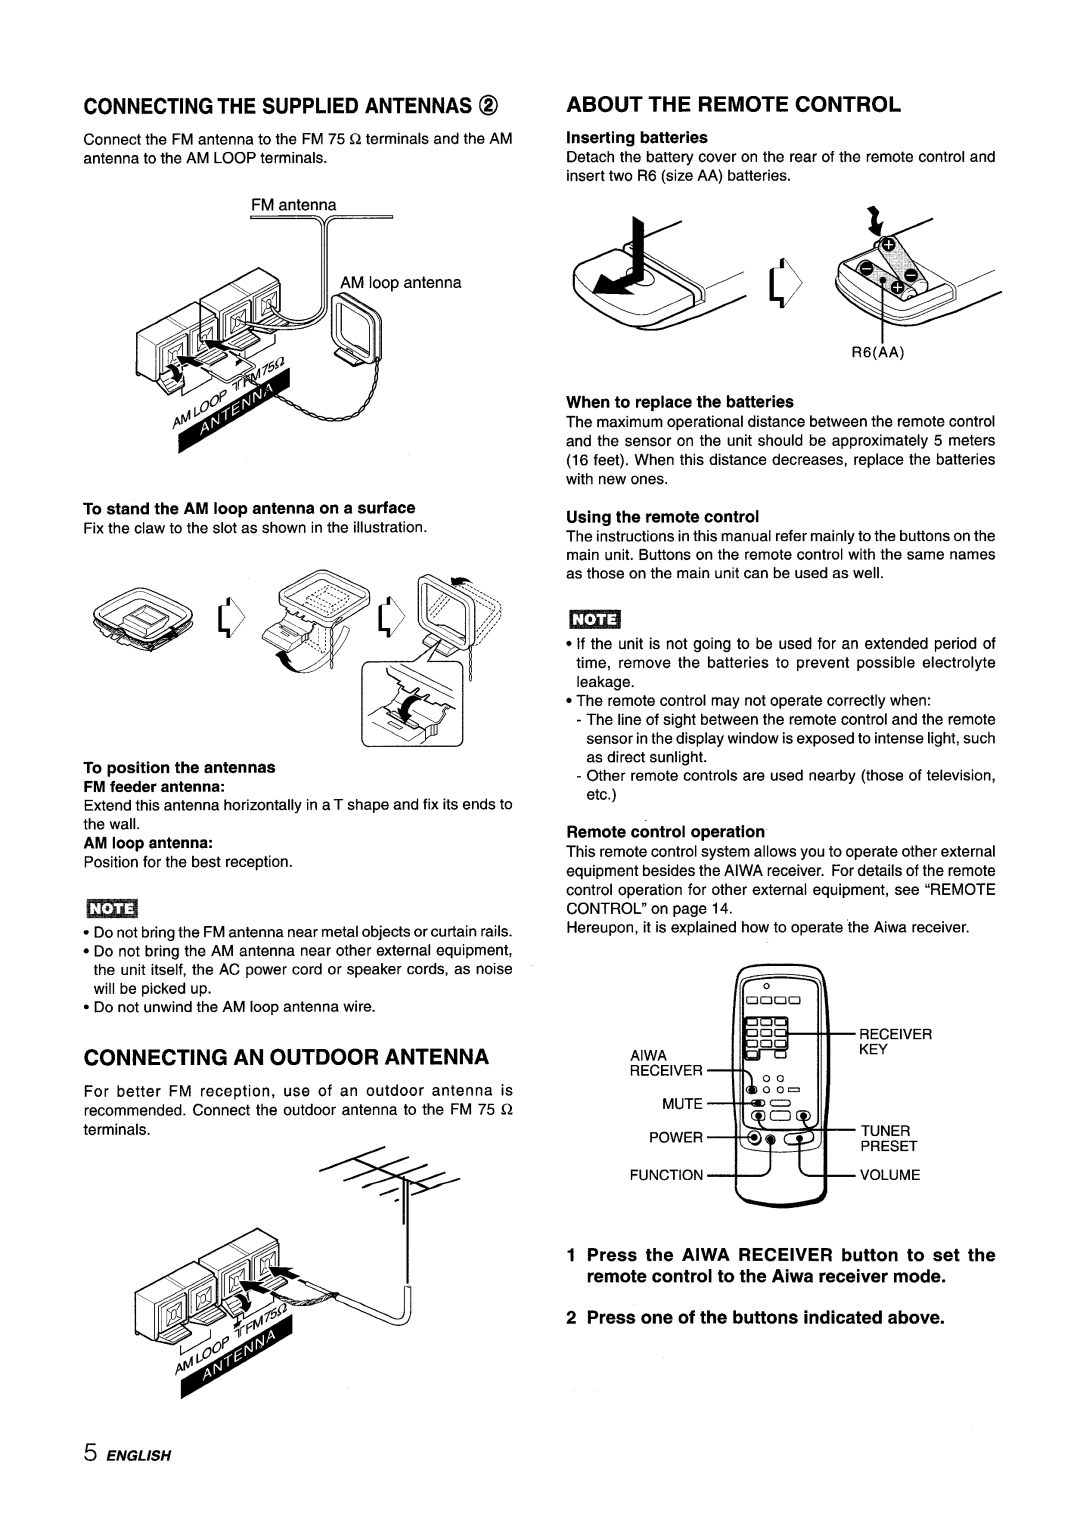 Aiwa AV-X220 Connecting An Outdoor Antenna, Connecting The Supplied Antennas @, About The Remote Control, AM loop antenna 